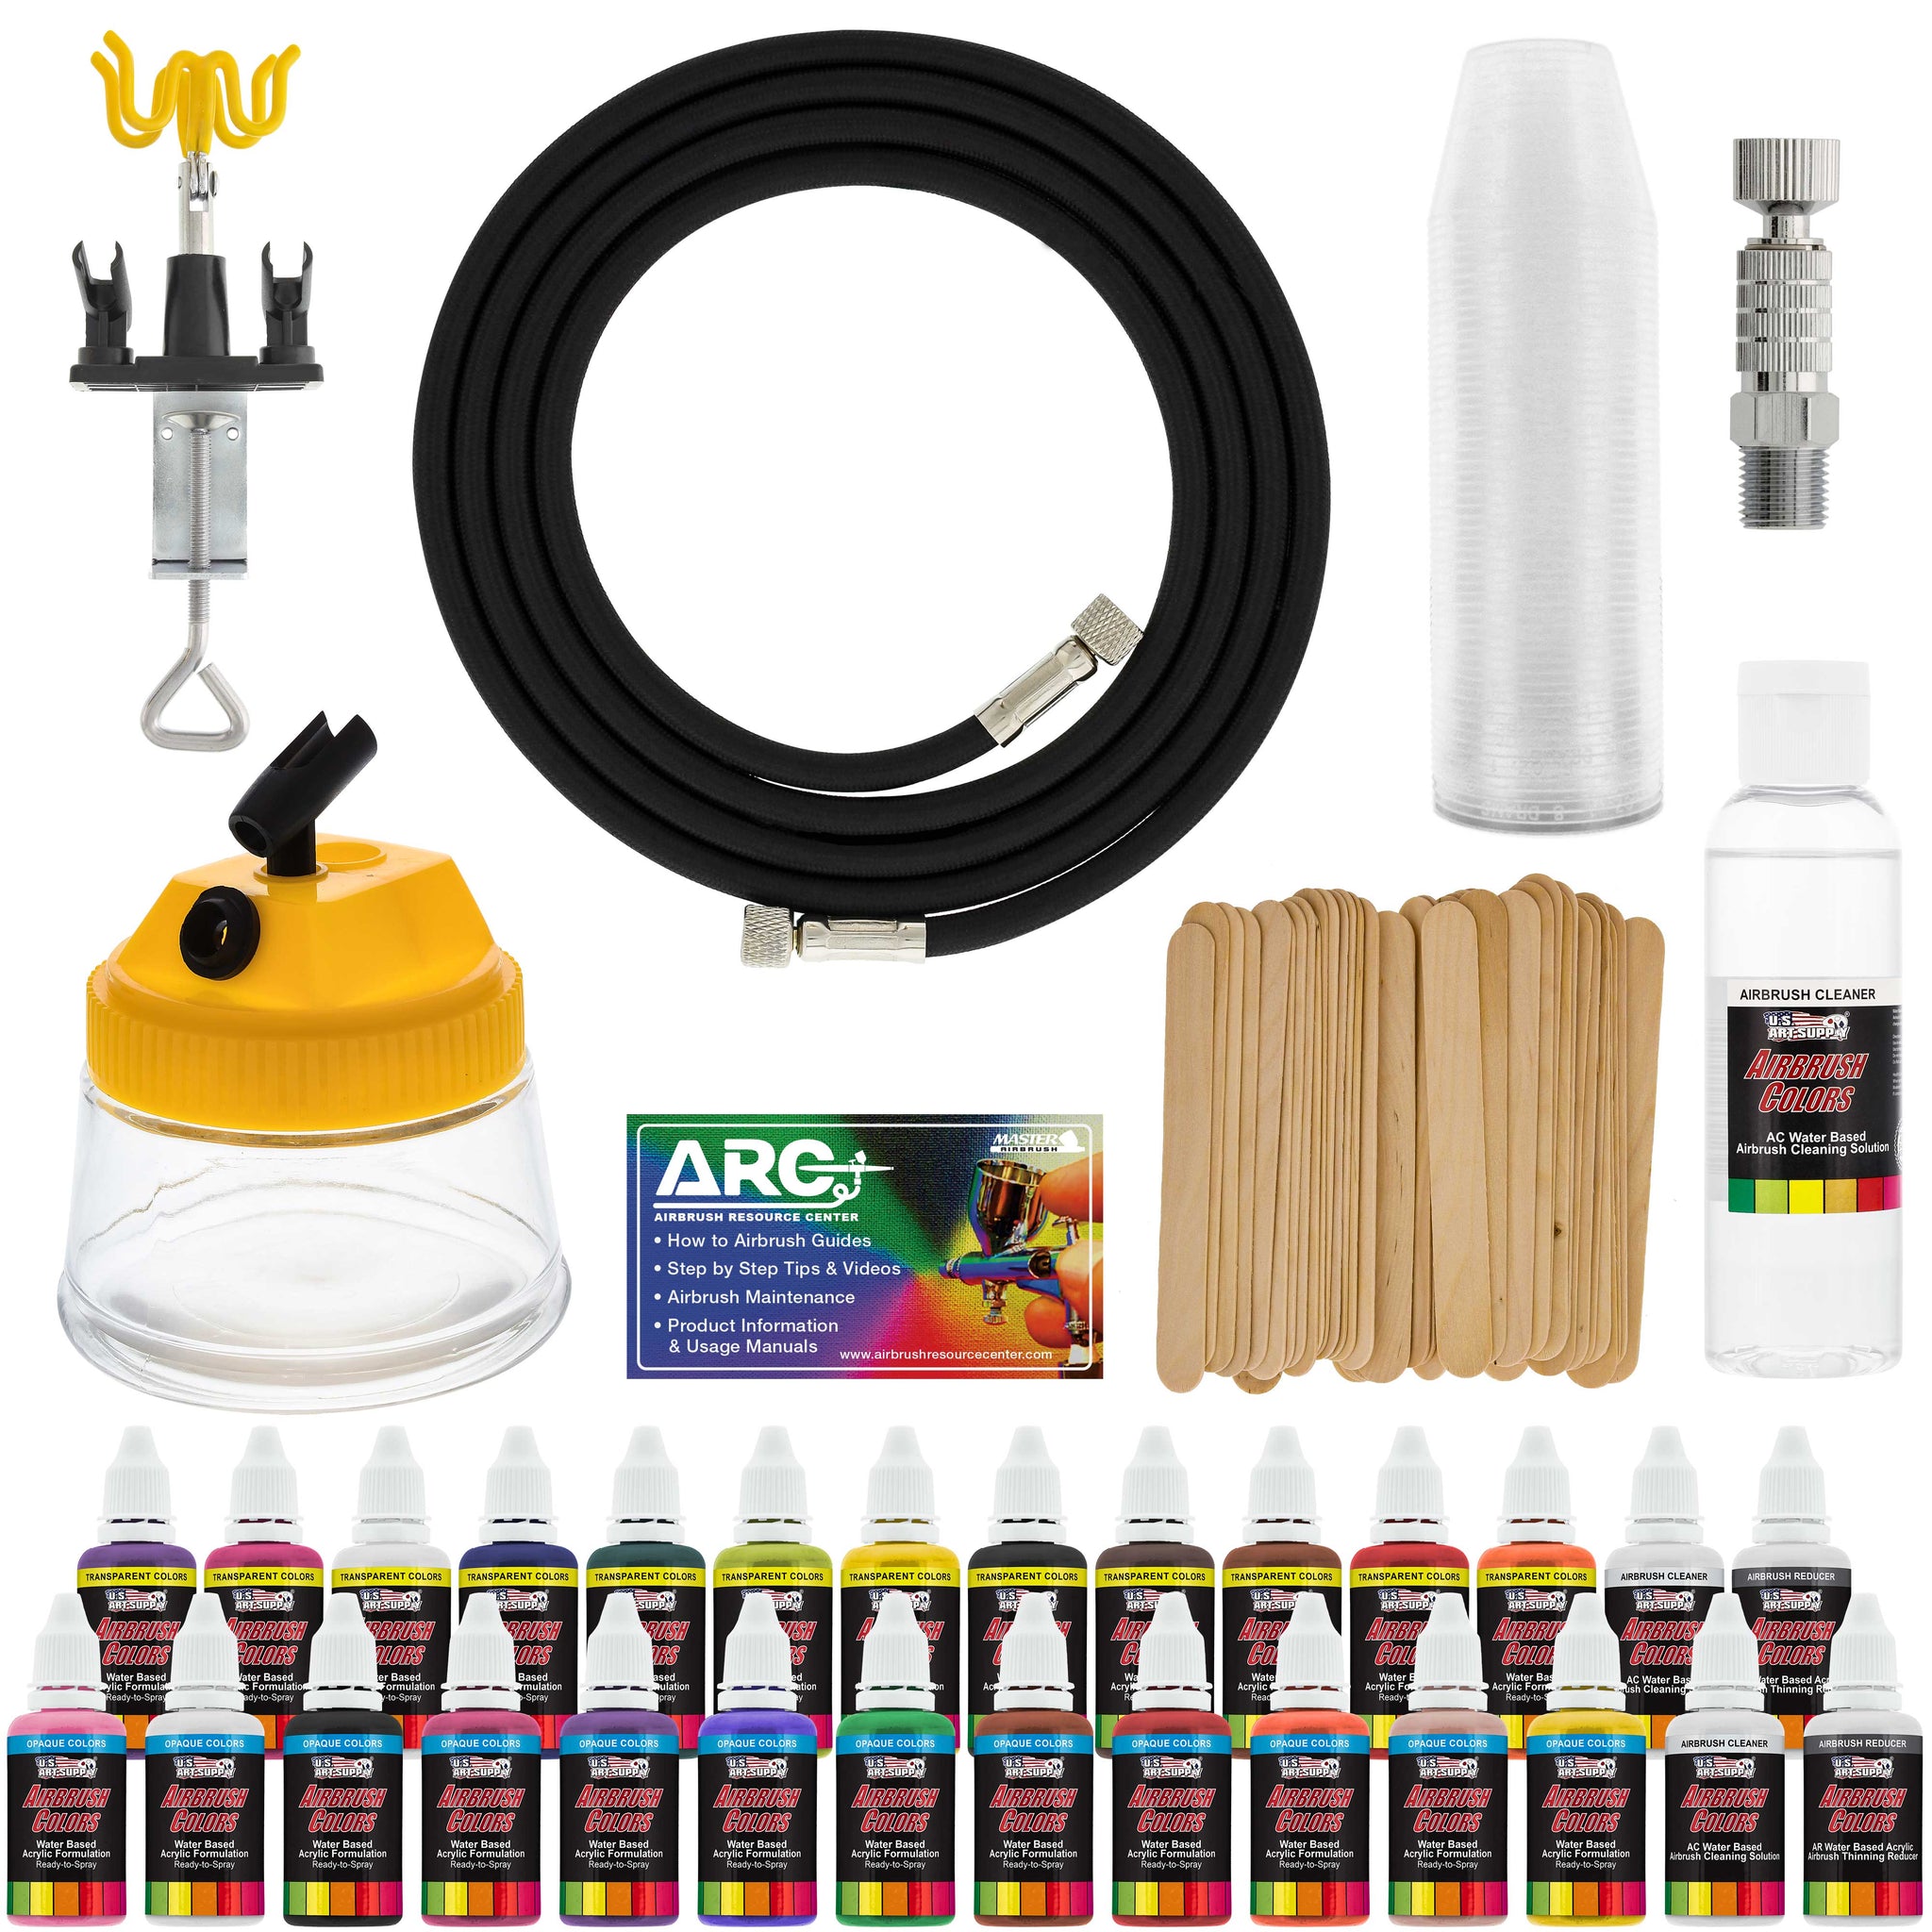 24 Color Acrylic Airbrush Paint Set & Accessories Kit with Airbrush Cleaning Pot & Holder, Air Hose, Quick-Connect and Mixing Cups